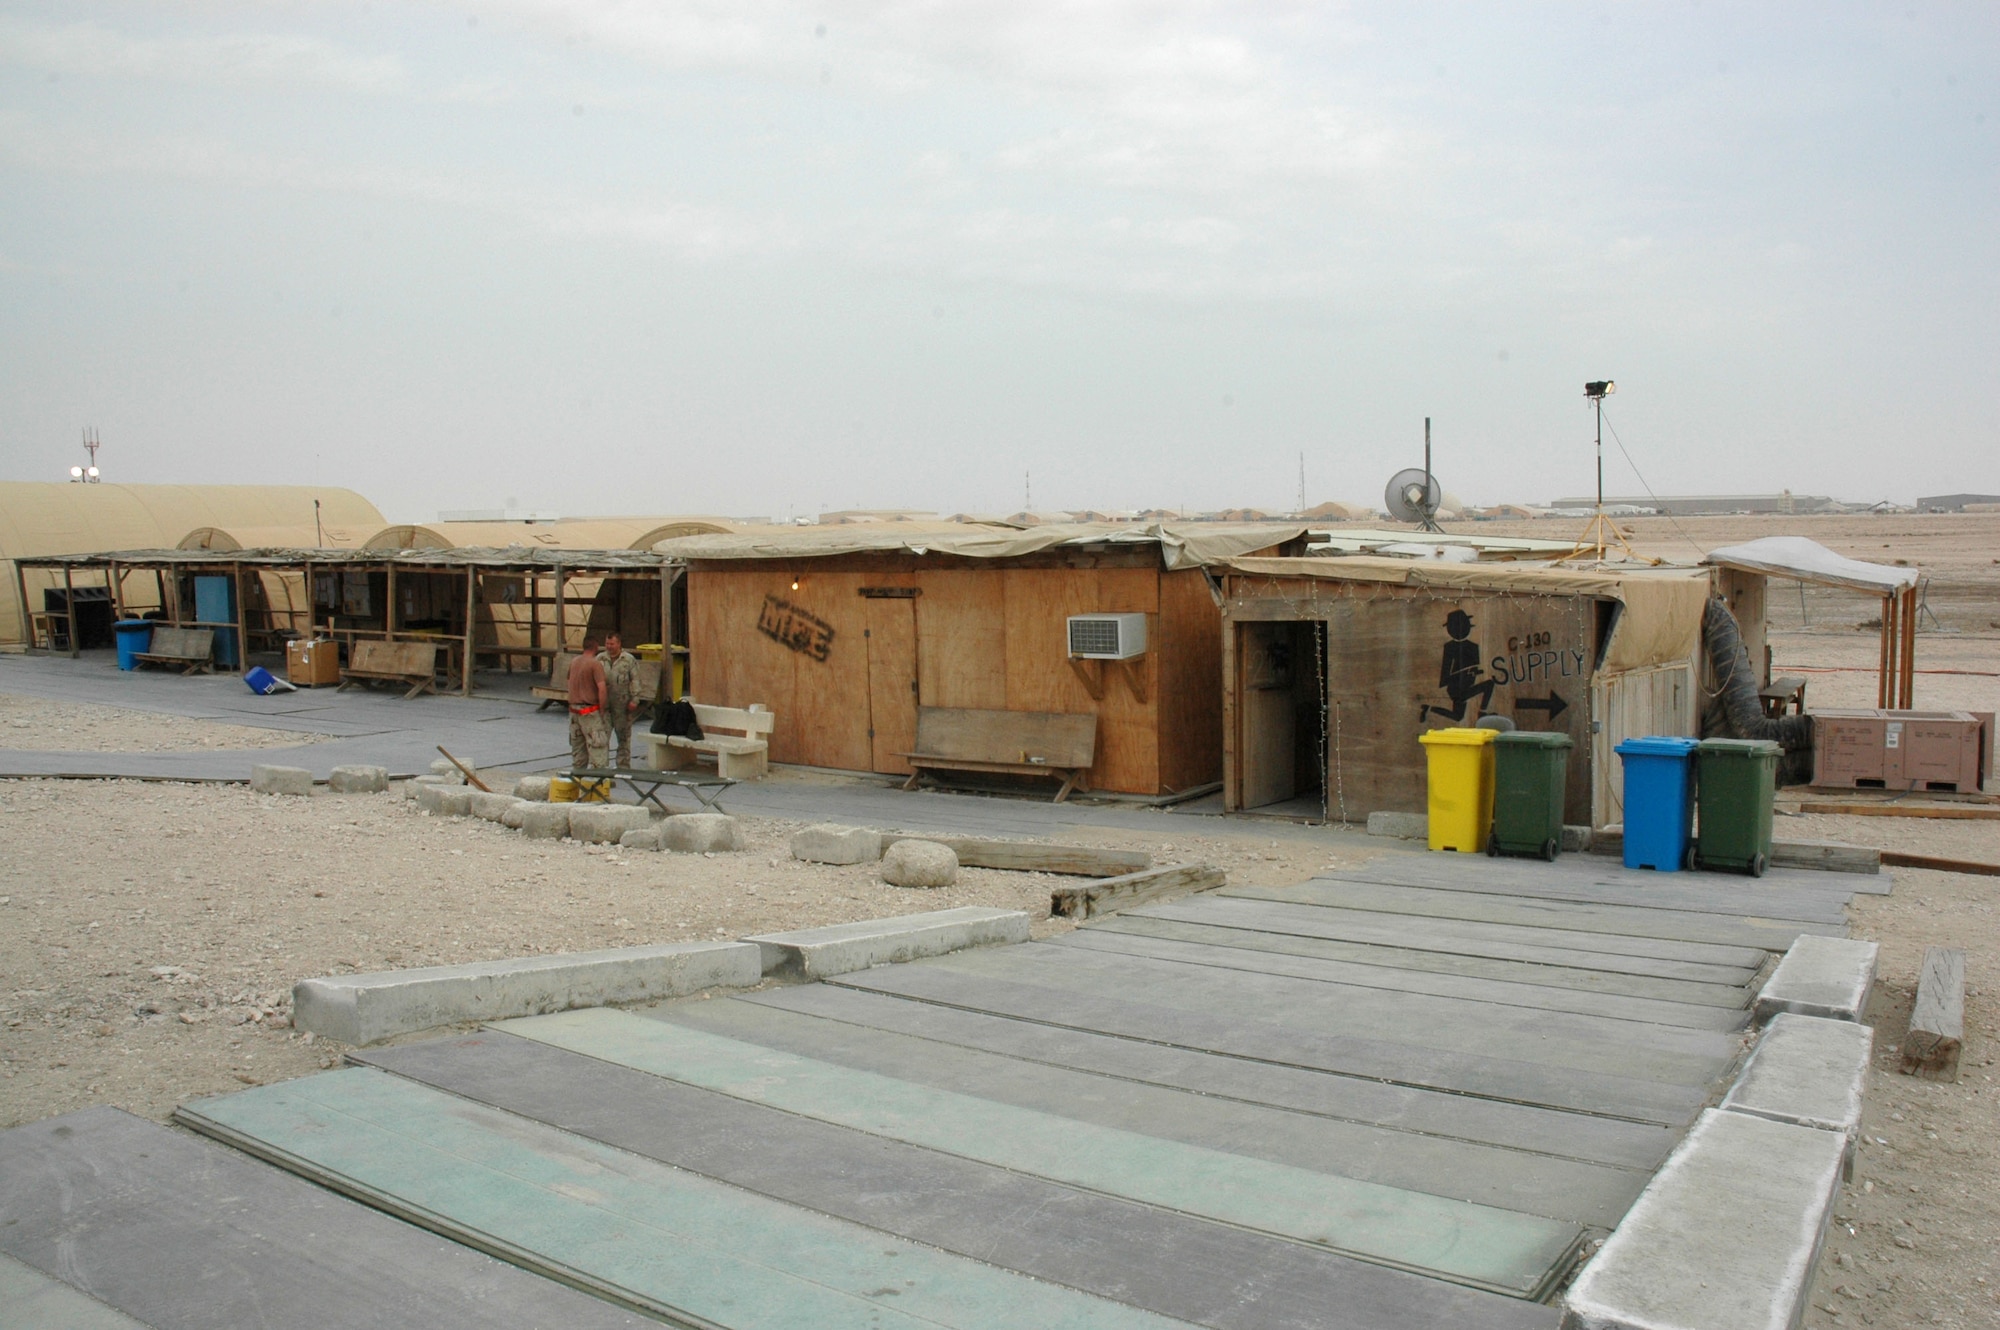 "Shanty Town" began with three tents in January 2004 in Southwest Asia. Each rotation of maintainers added something new to the complex and it morphed into something different. The new upgraded complex will consist of five tents currently being built by the 379th Expeditionary Civil Engineer Squadron, that will approximately double the current square footage of the former facility. (U.S. Air Force photo)